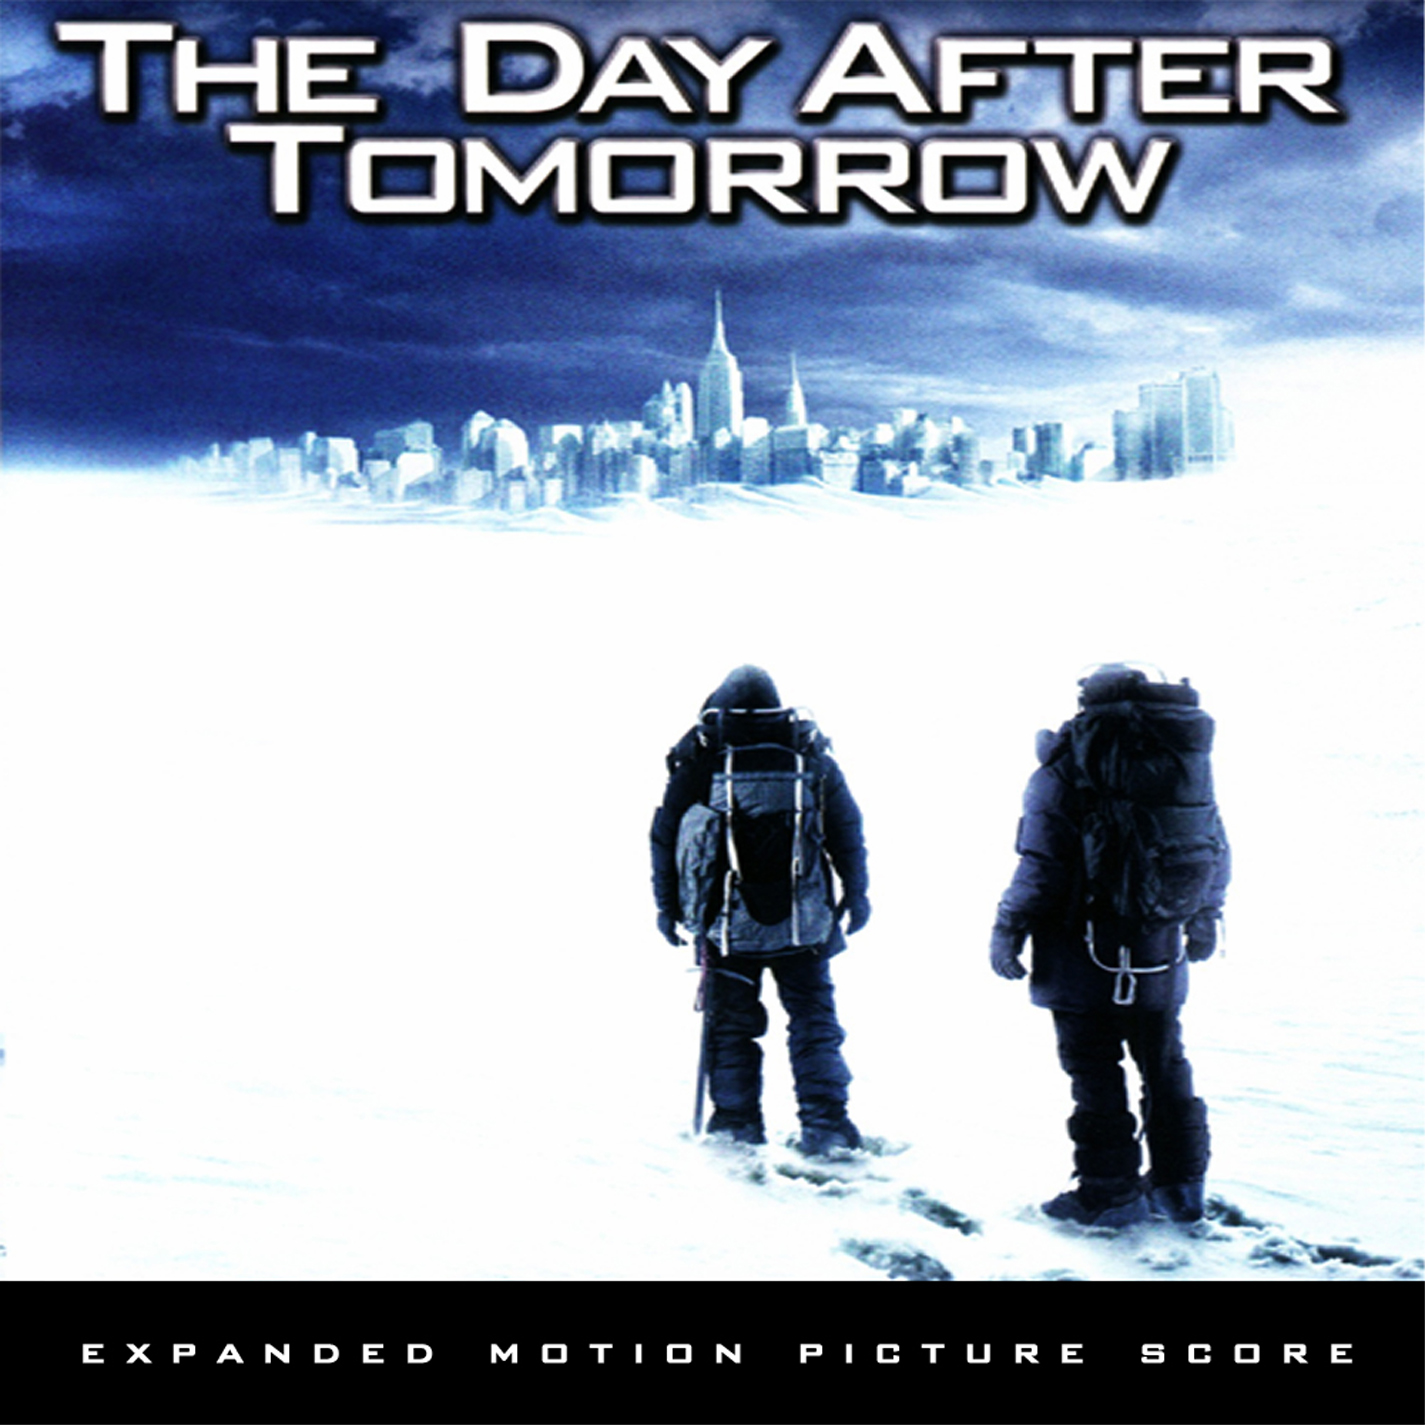 The day before tomorrow. The Day after tomorrow. Days after. The Day after tomorrow игра. The Day after tomorrow Band.